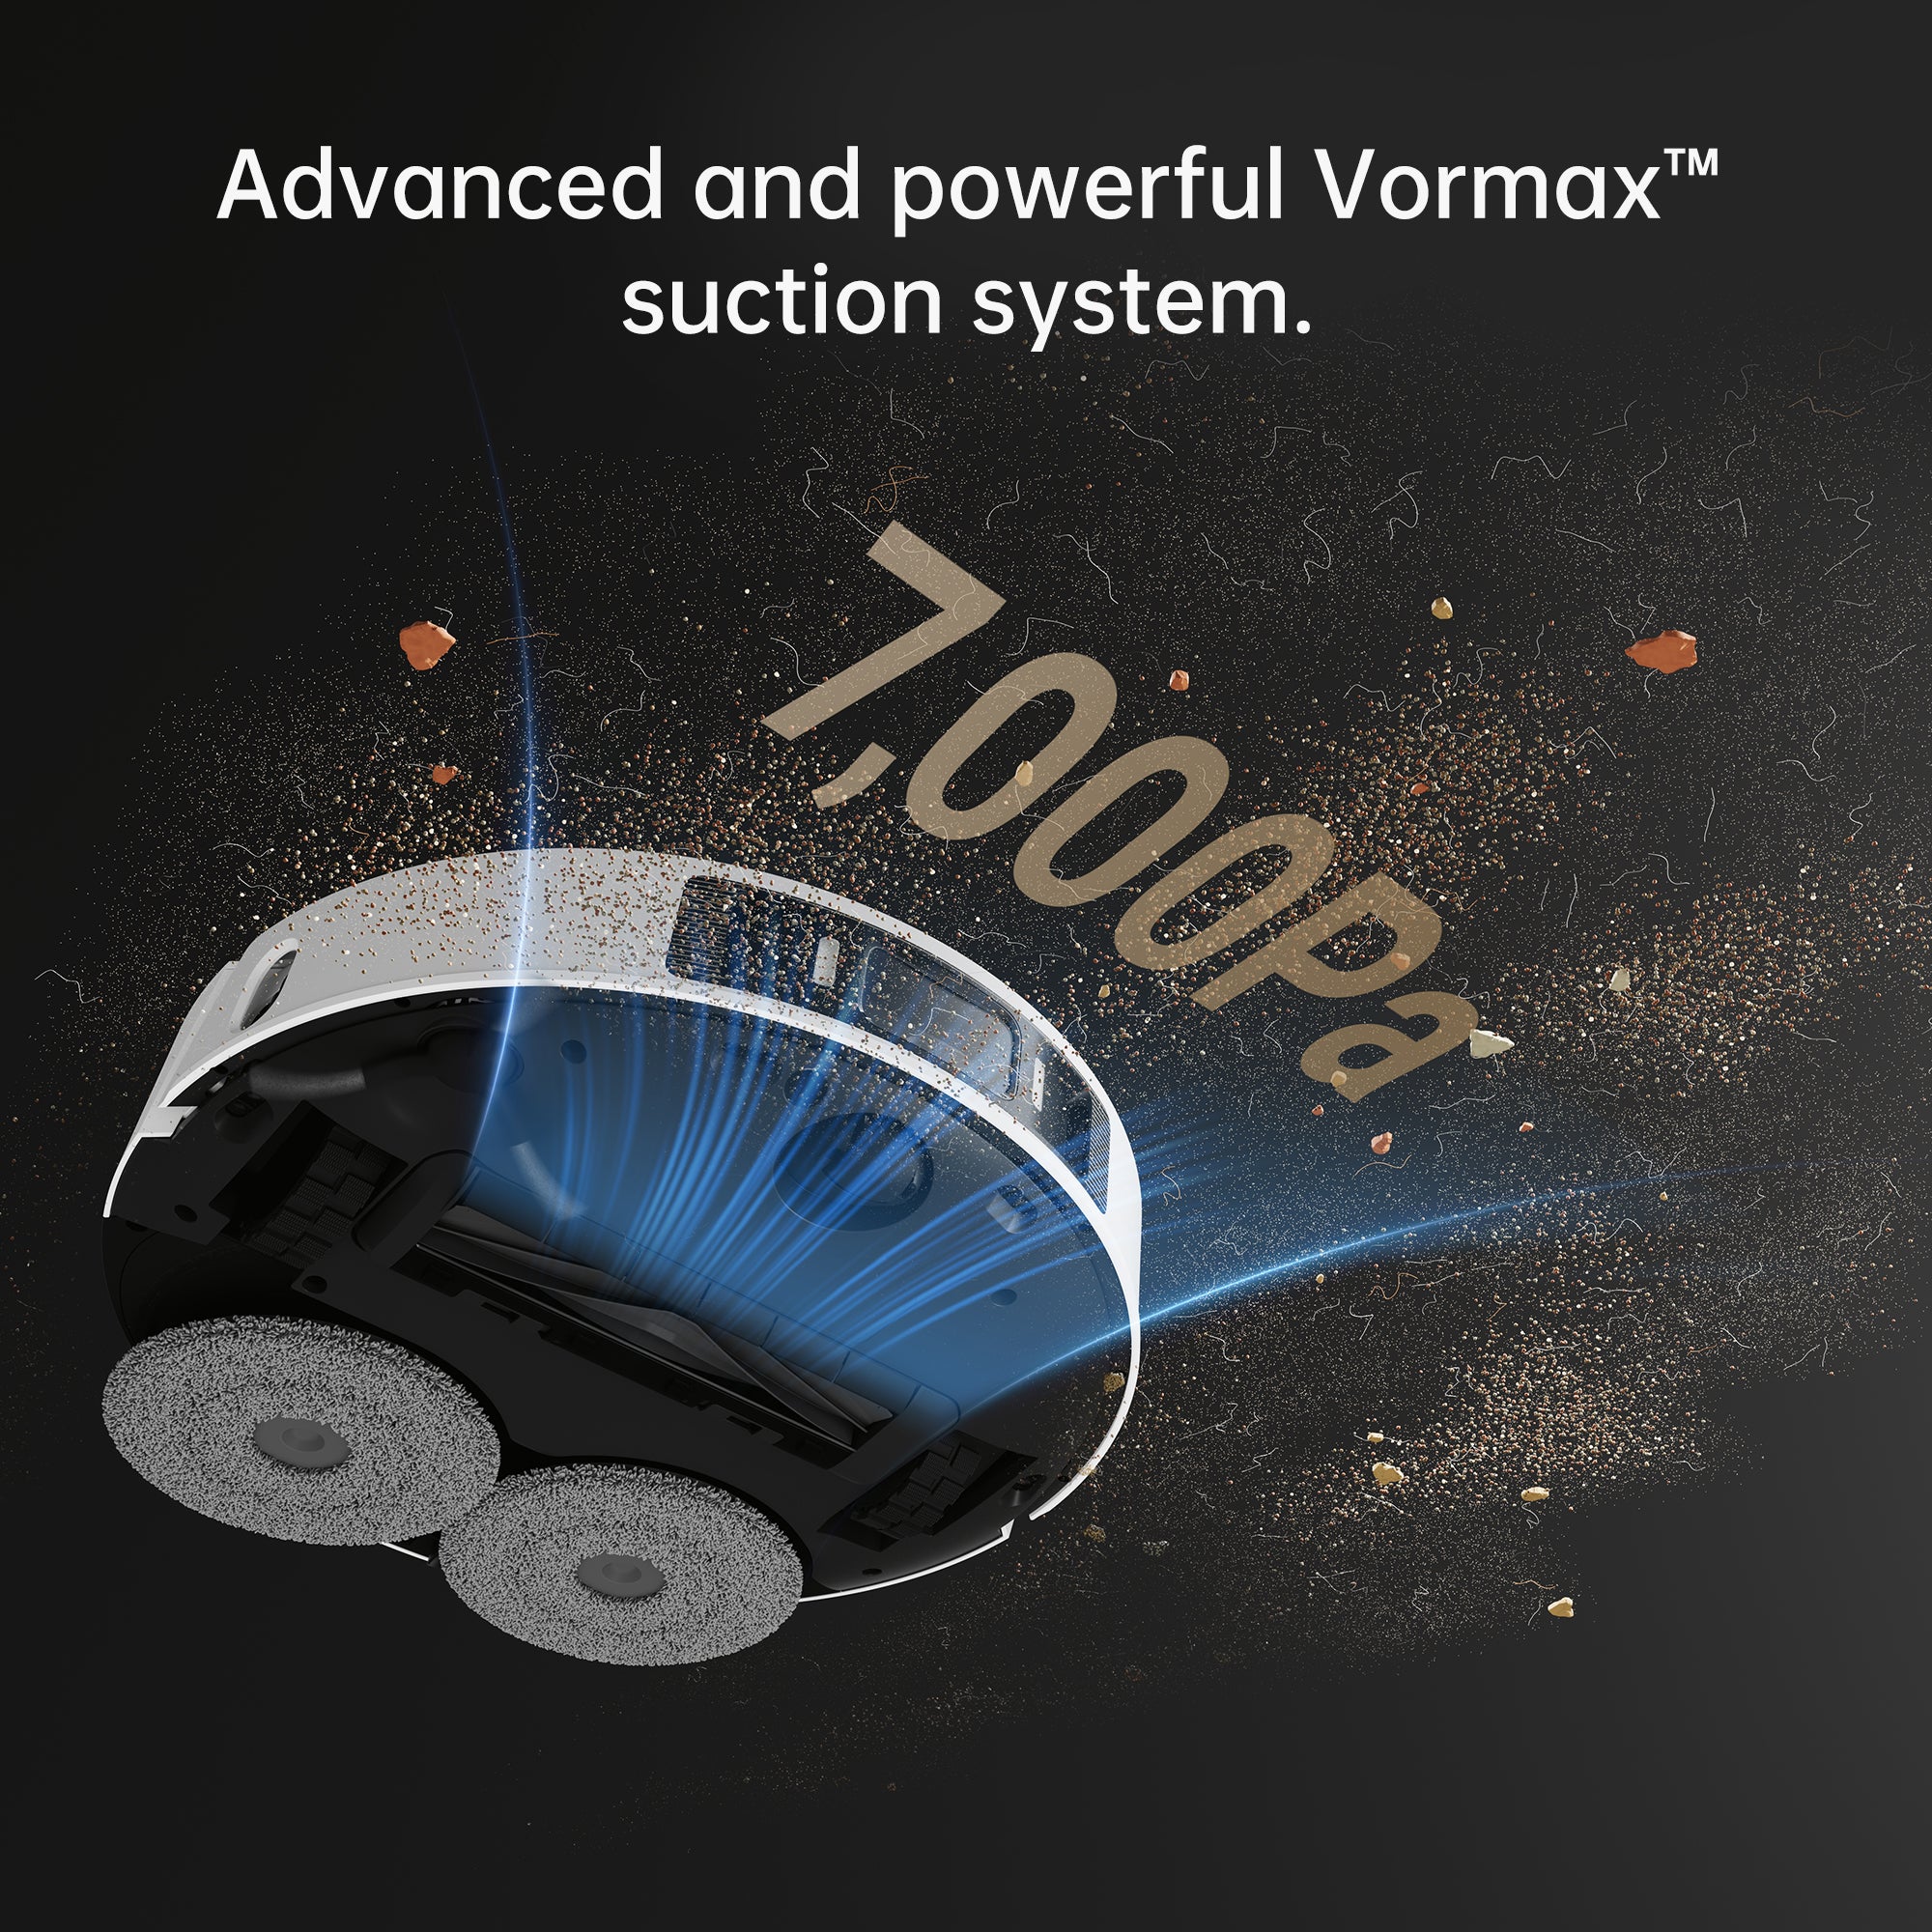 Dreame L20 Ultra Robot Vacuum and Mop Extend Cleaner with Auto Mop Cleaning and Drying, Self-Refilling and Self-Emptying Base Station